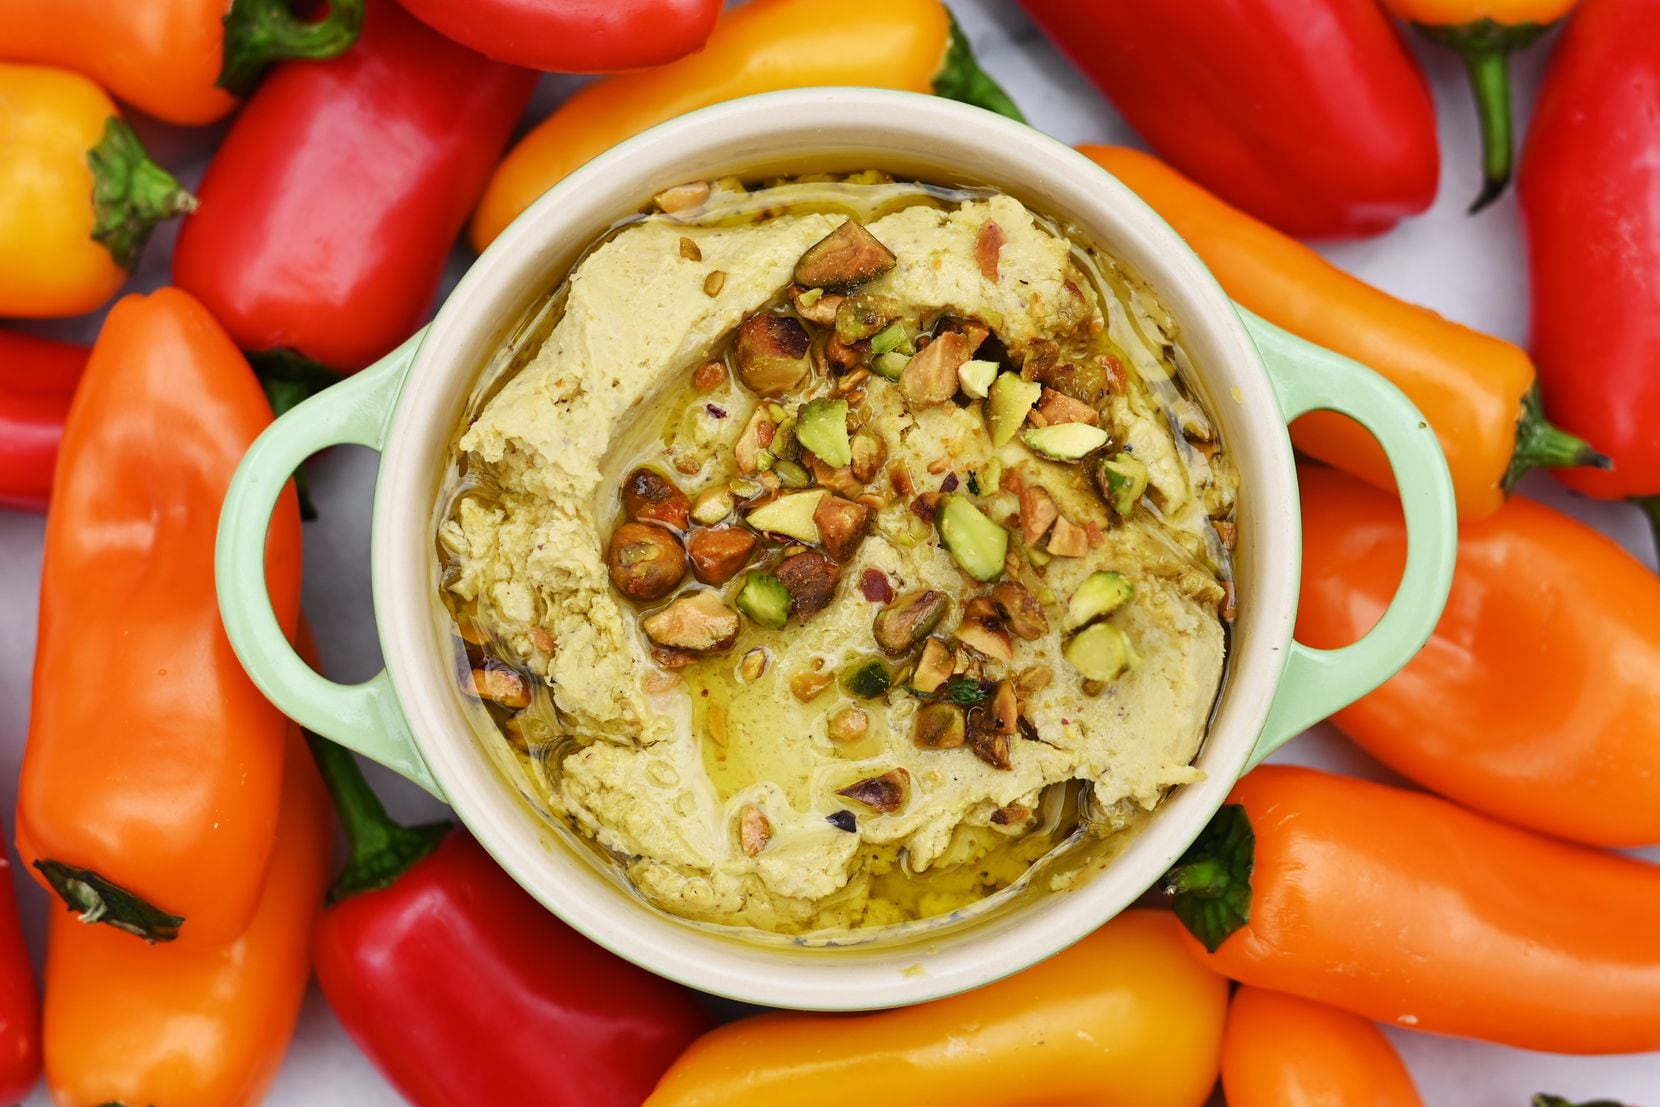 Pistachio Hummus served with baby peppers